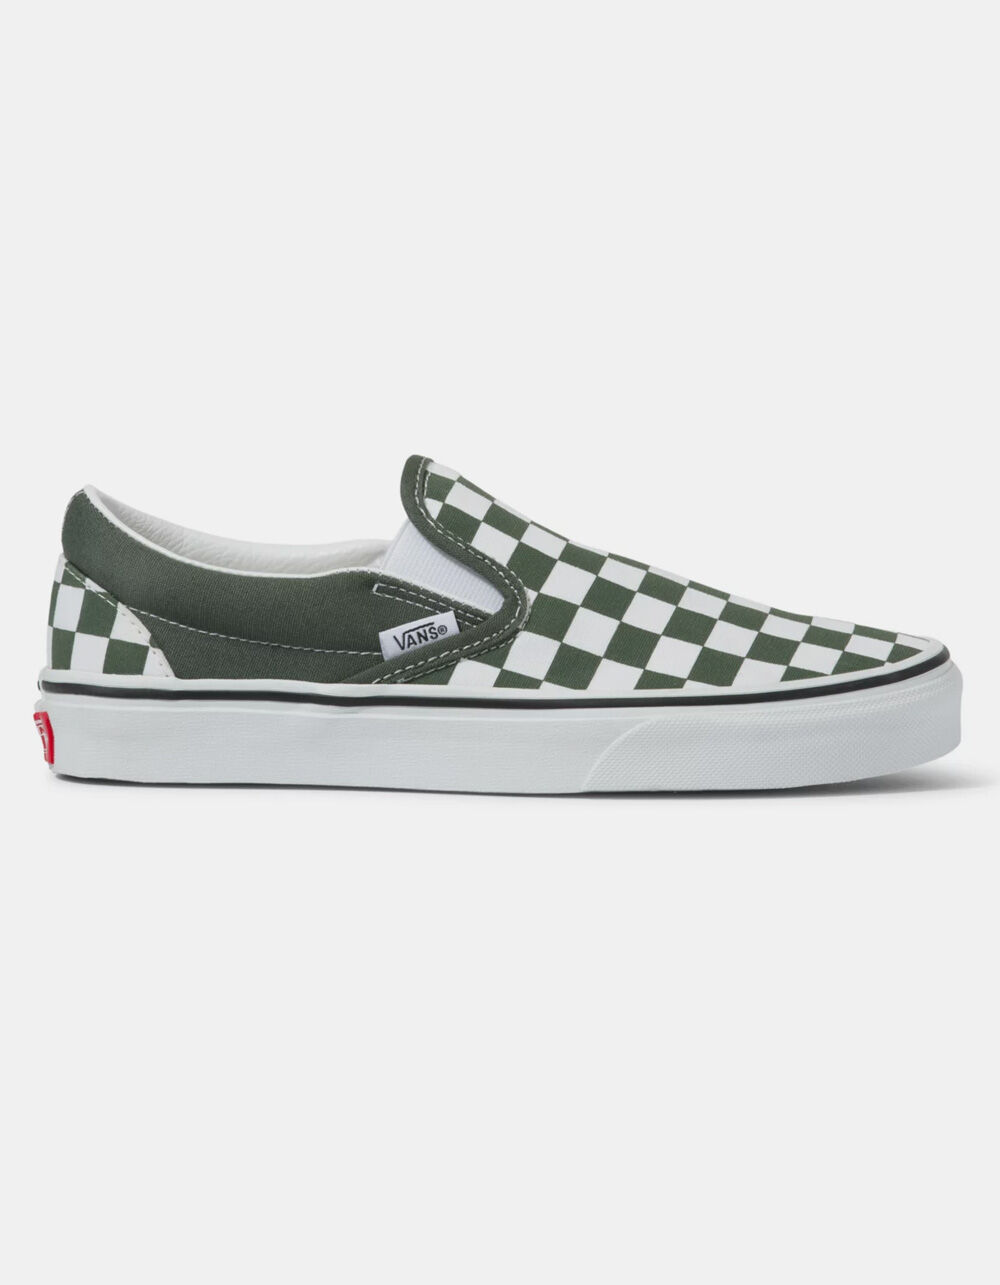 VANS Checkerboard Classic Womens Slip On Shoes - OLIVE | Tillys